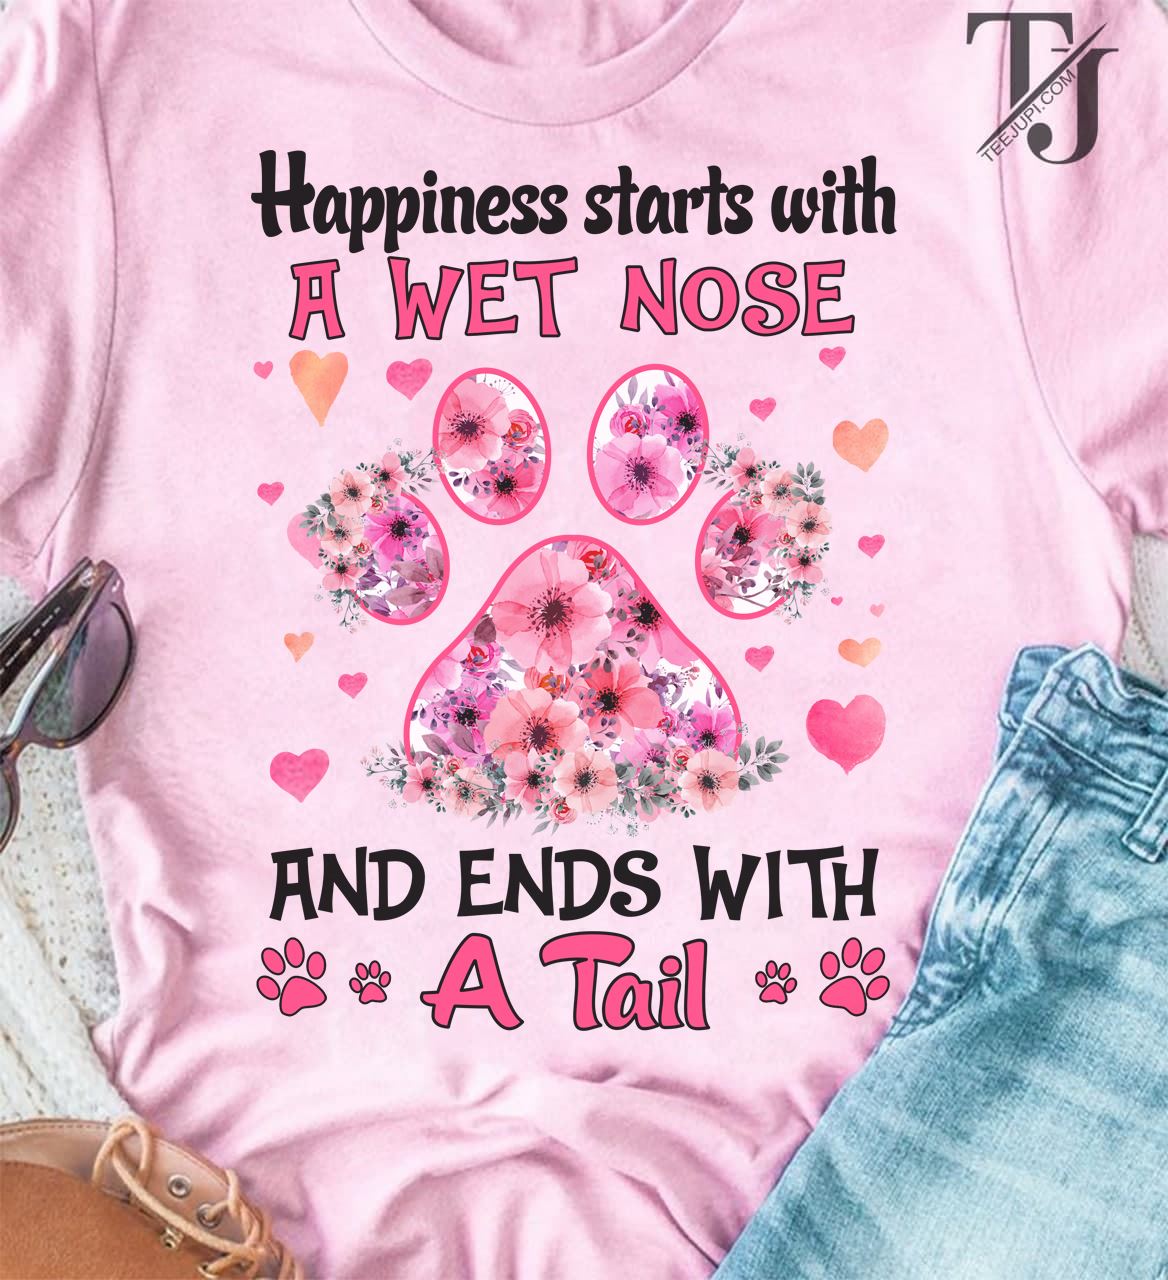 Happiness starts with a wet nose and ends with a tail